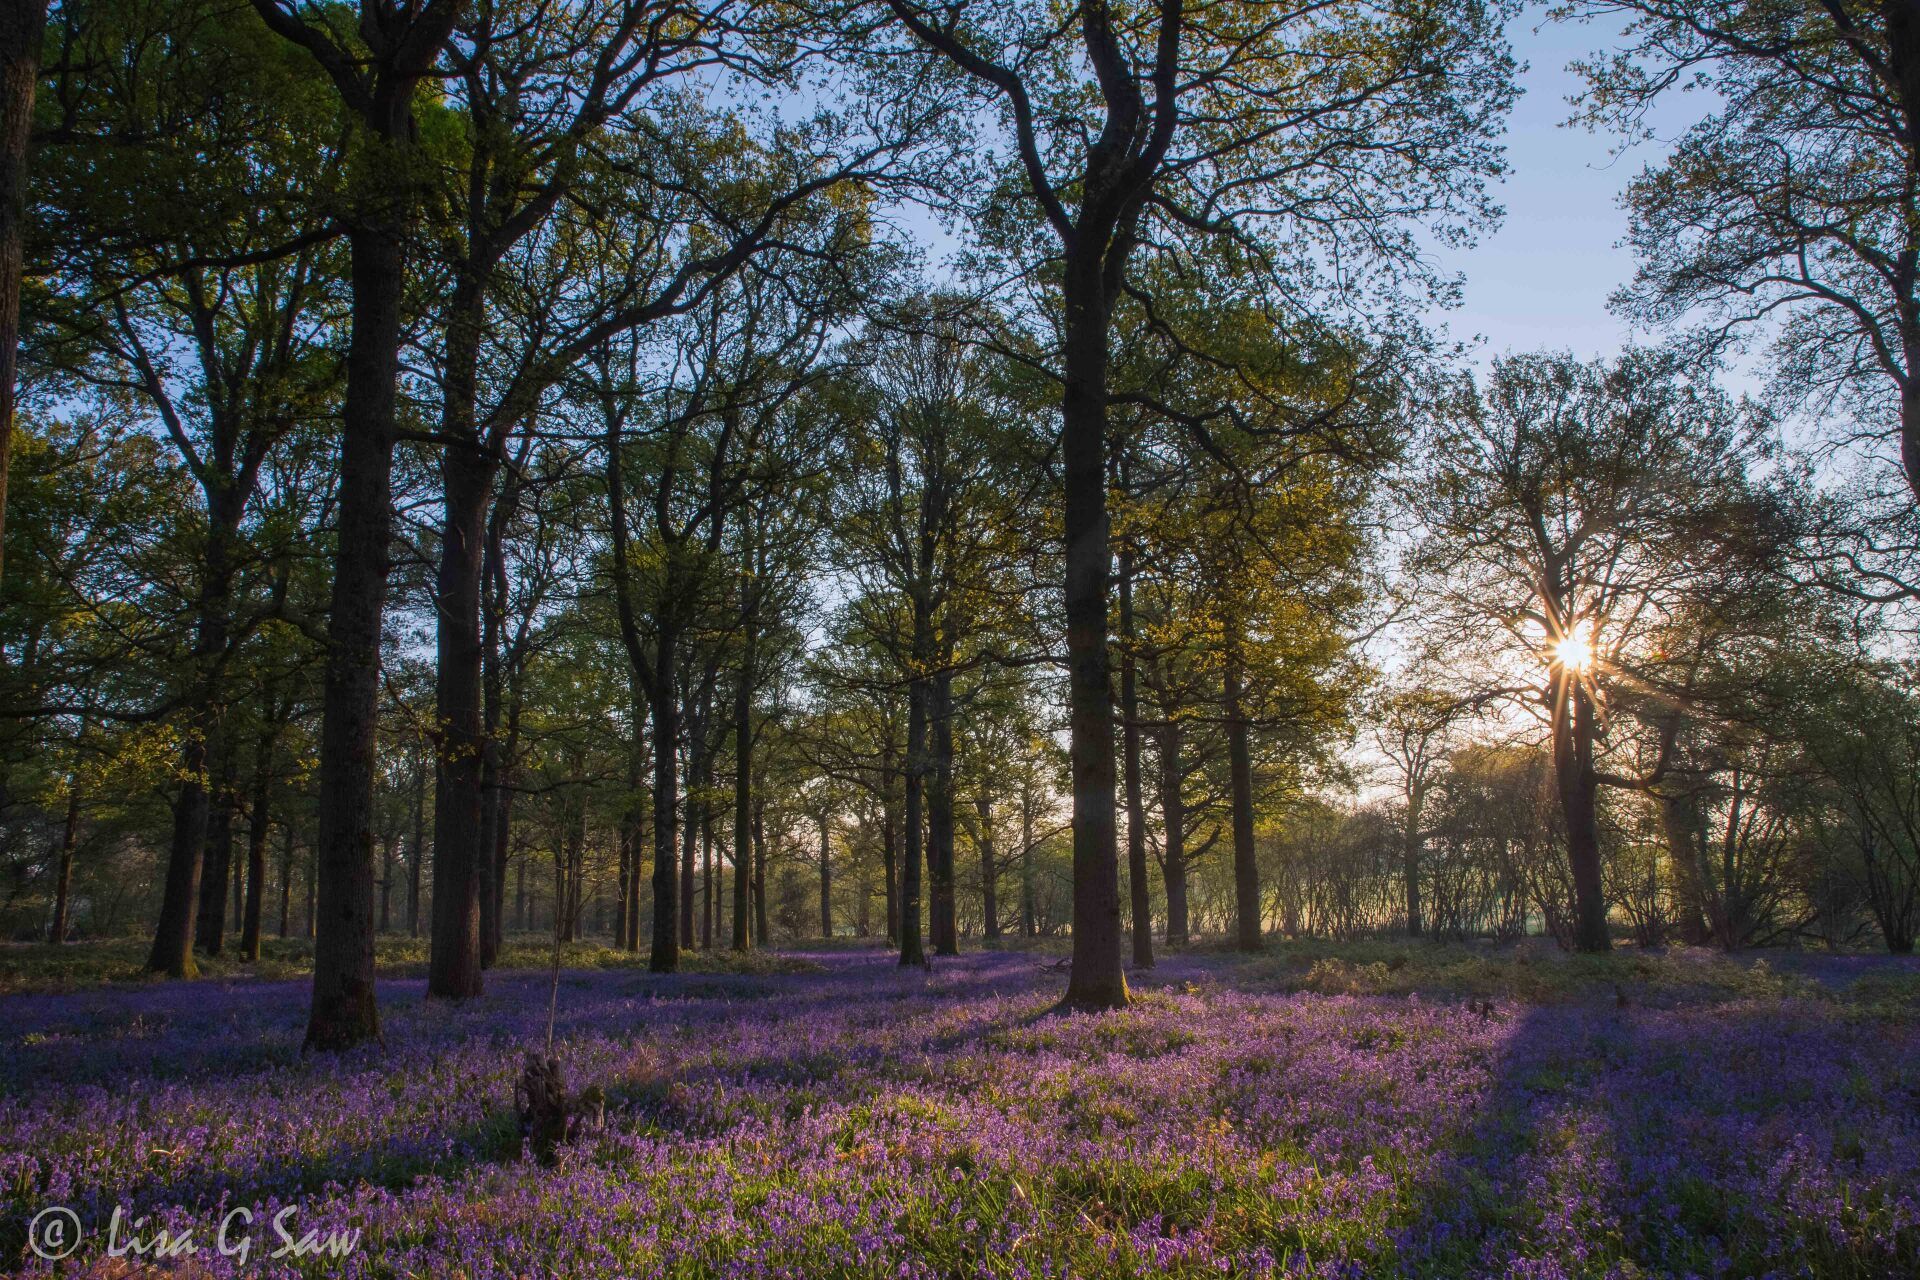 Sunburst and a bluebell clearing at dawn